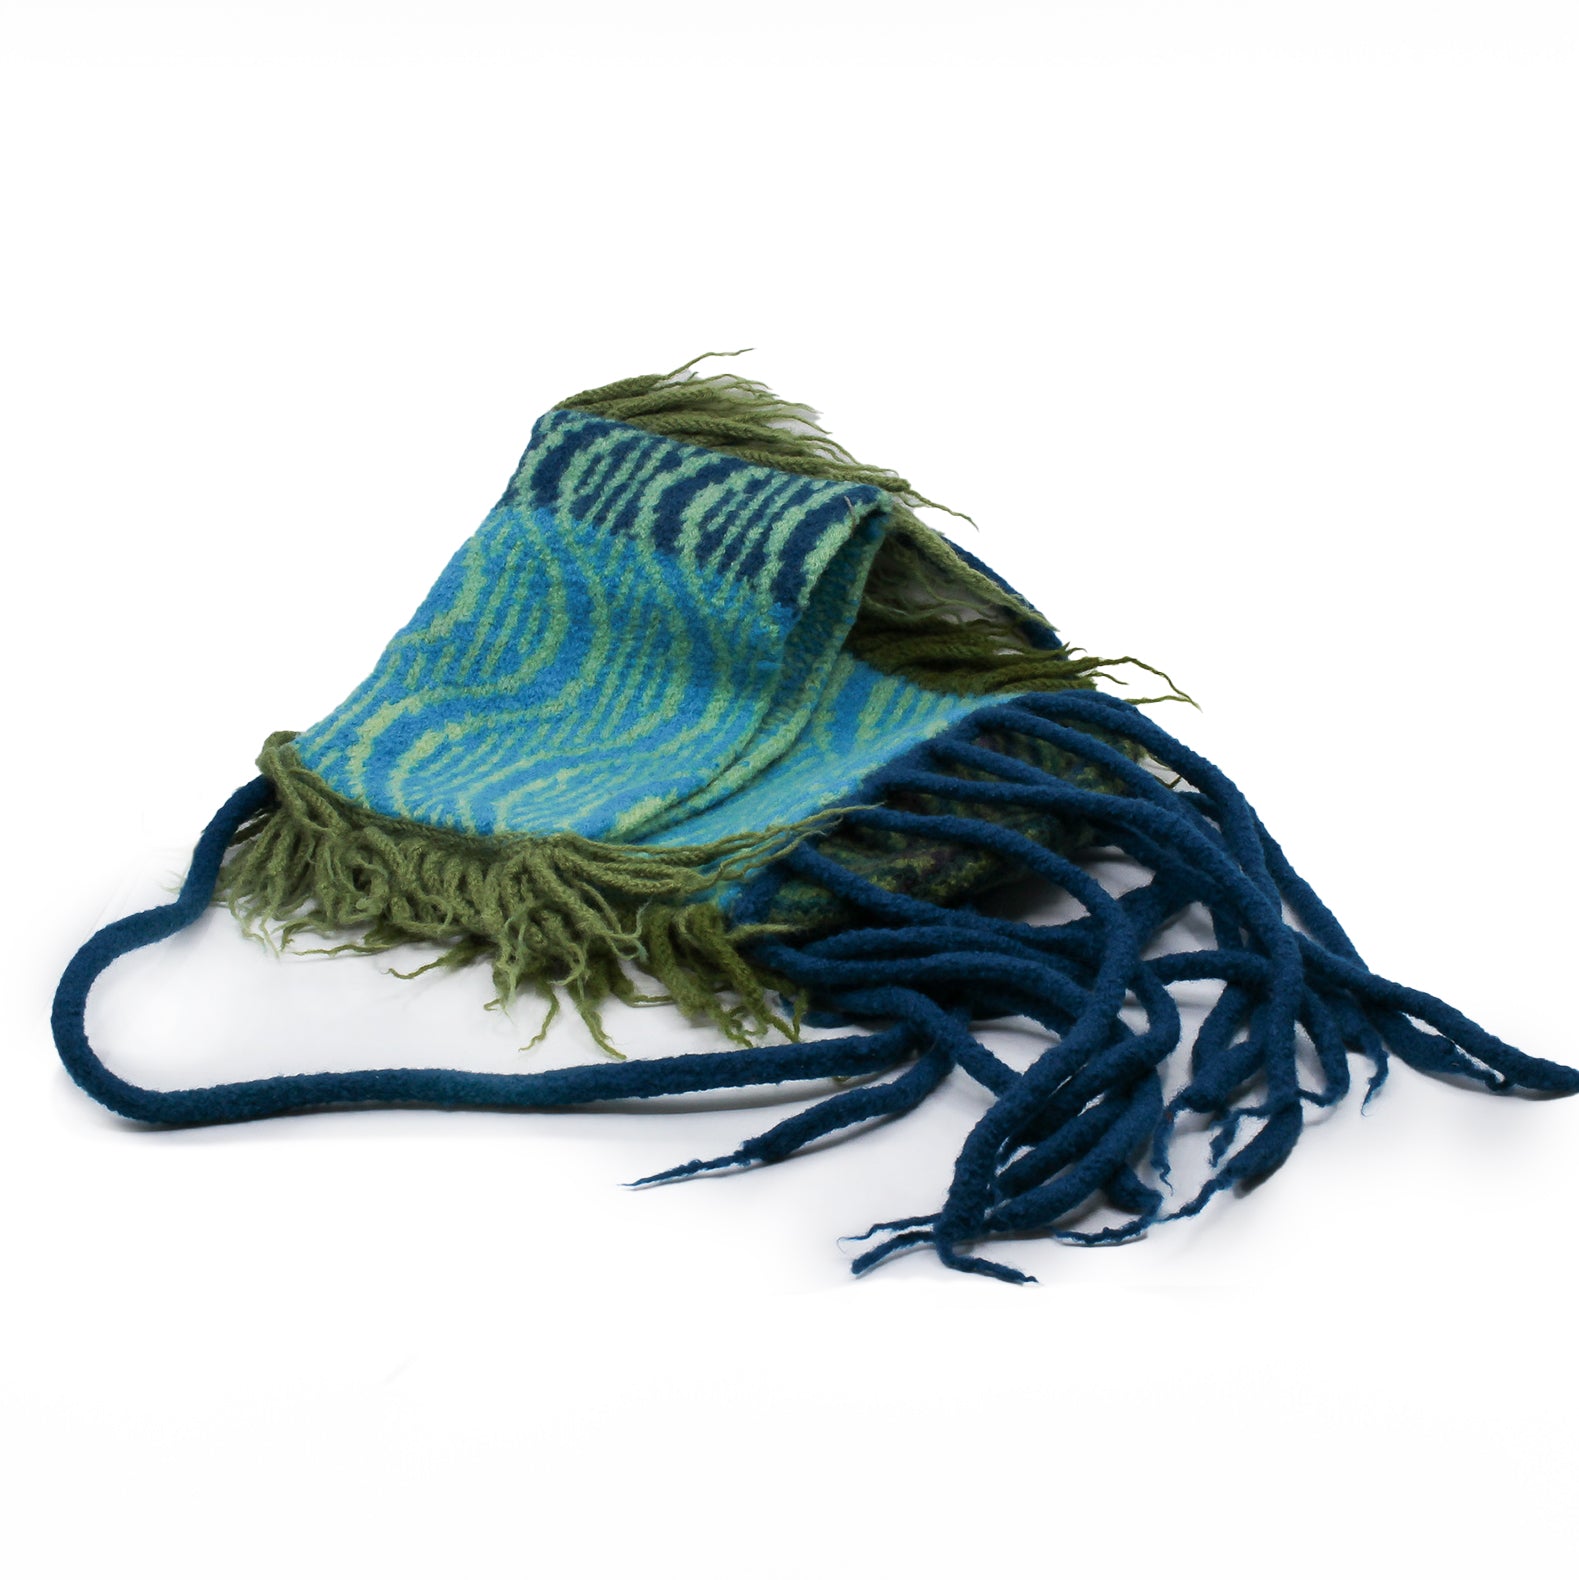 Blue and green bag with green and teal fringe